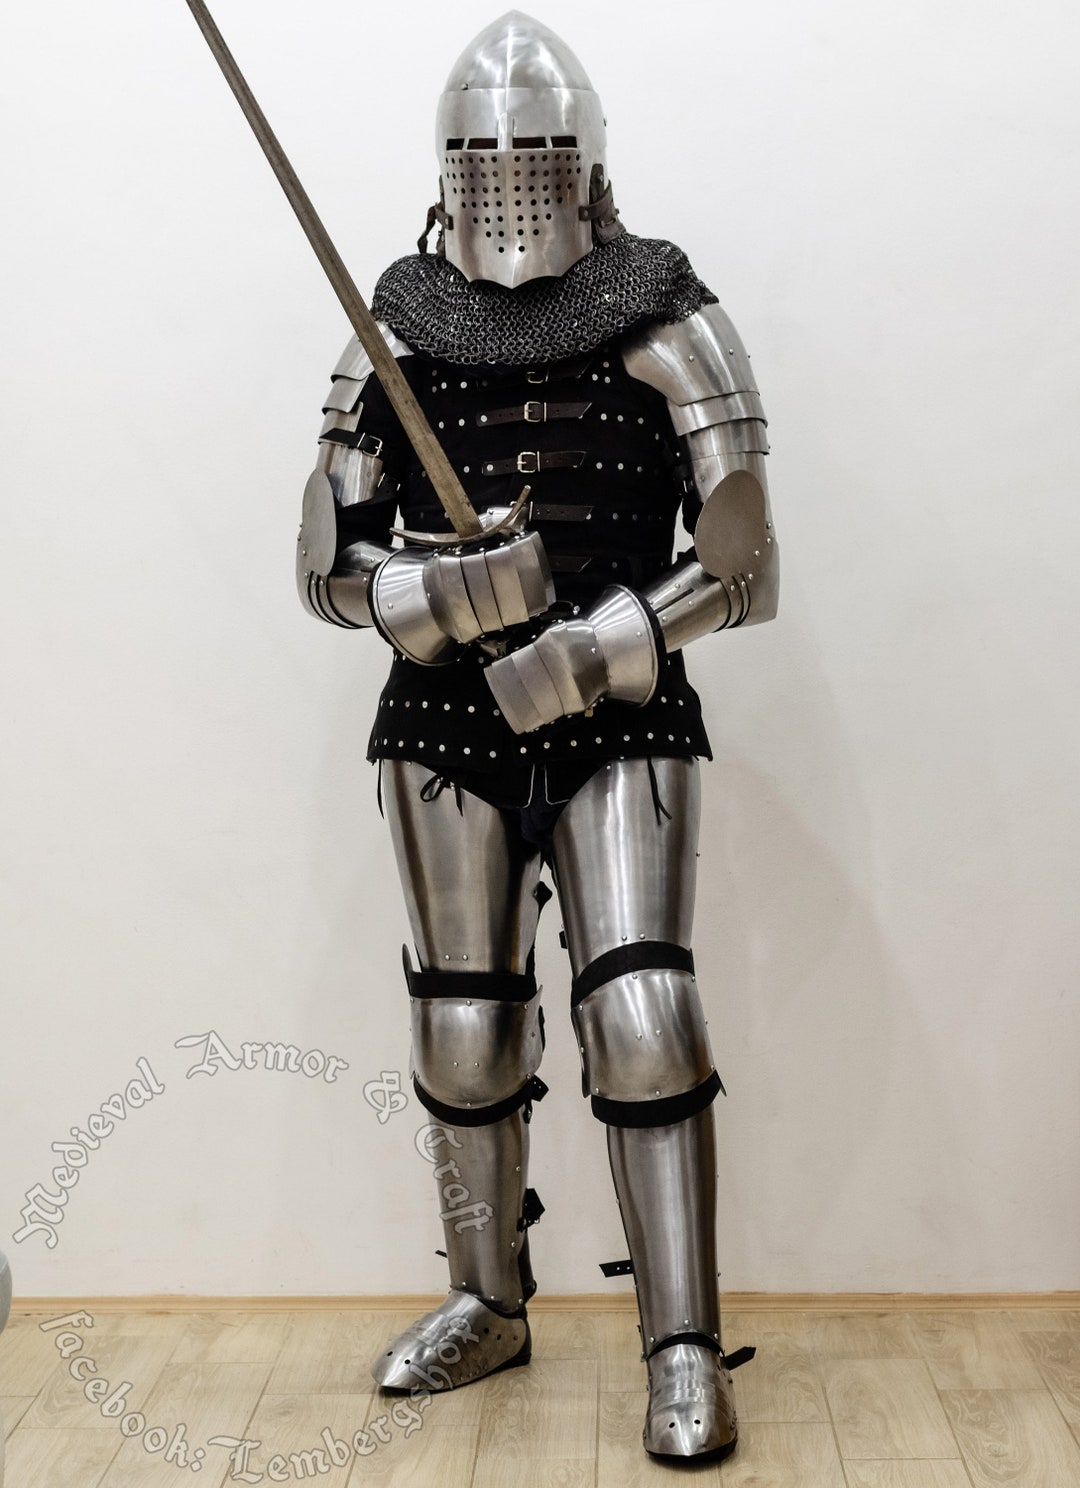 Full Set of Knight Armor footman.buhurt Medieval Armor, Ukrainian Quality.  HMB,IMCF, WMSF. Perfect for Beginners From the Helmet to Shoes. -   Canada